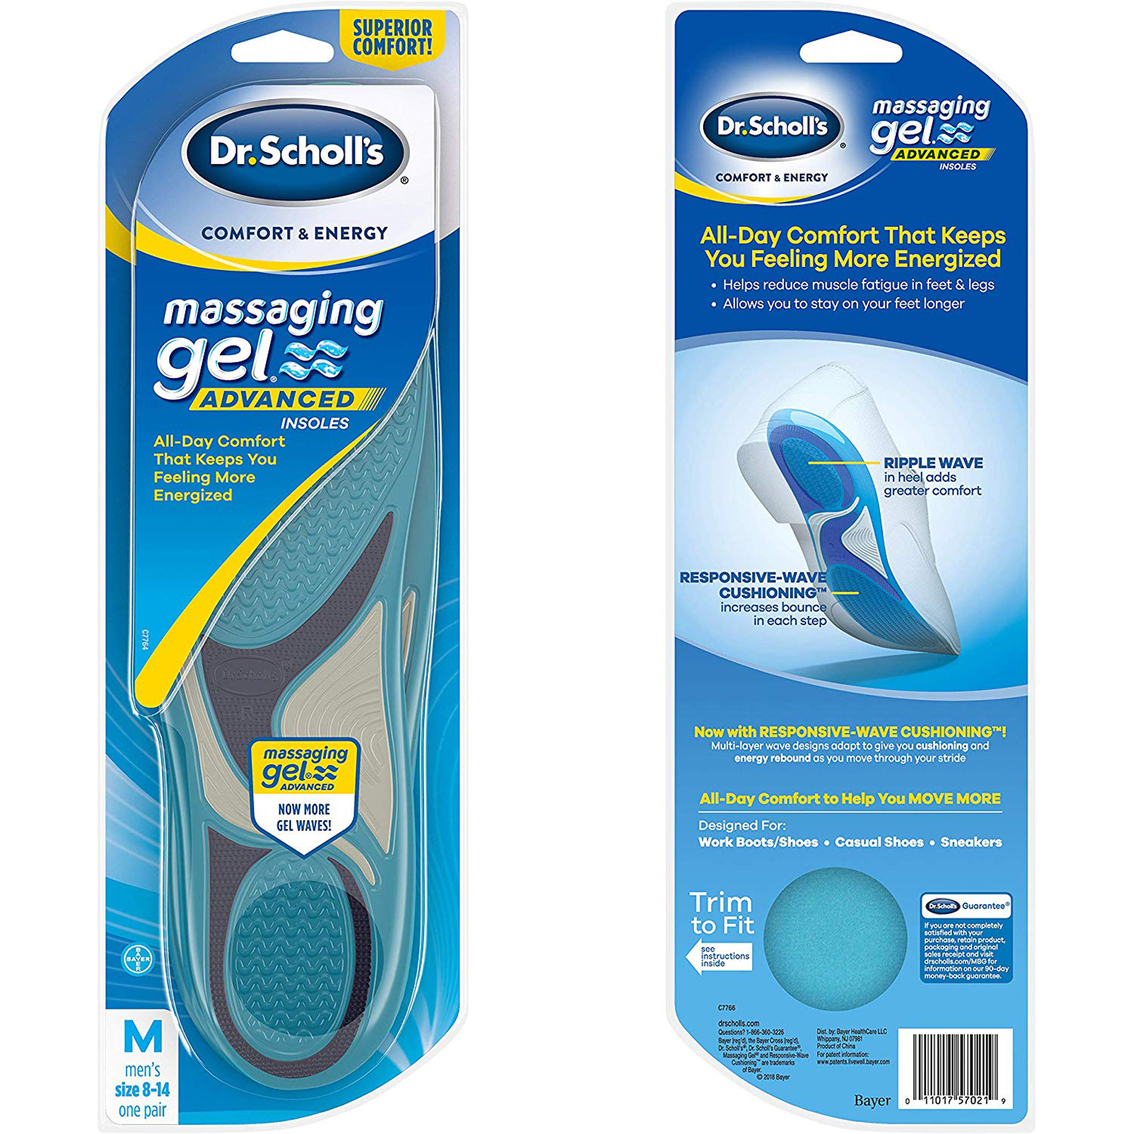 Dr. Scholl's Comfort And Energy Massaging Gel Advanced Insoles For Men ...